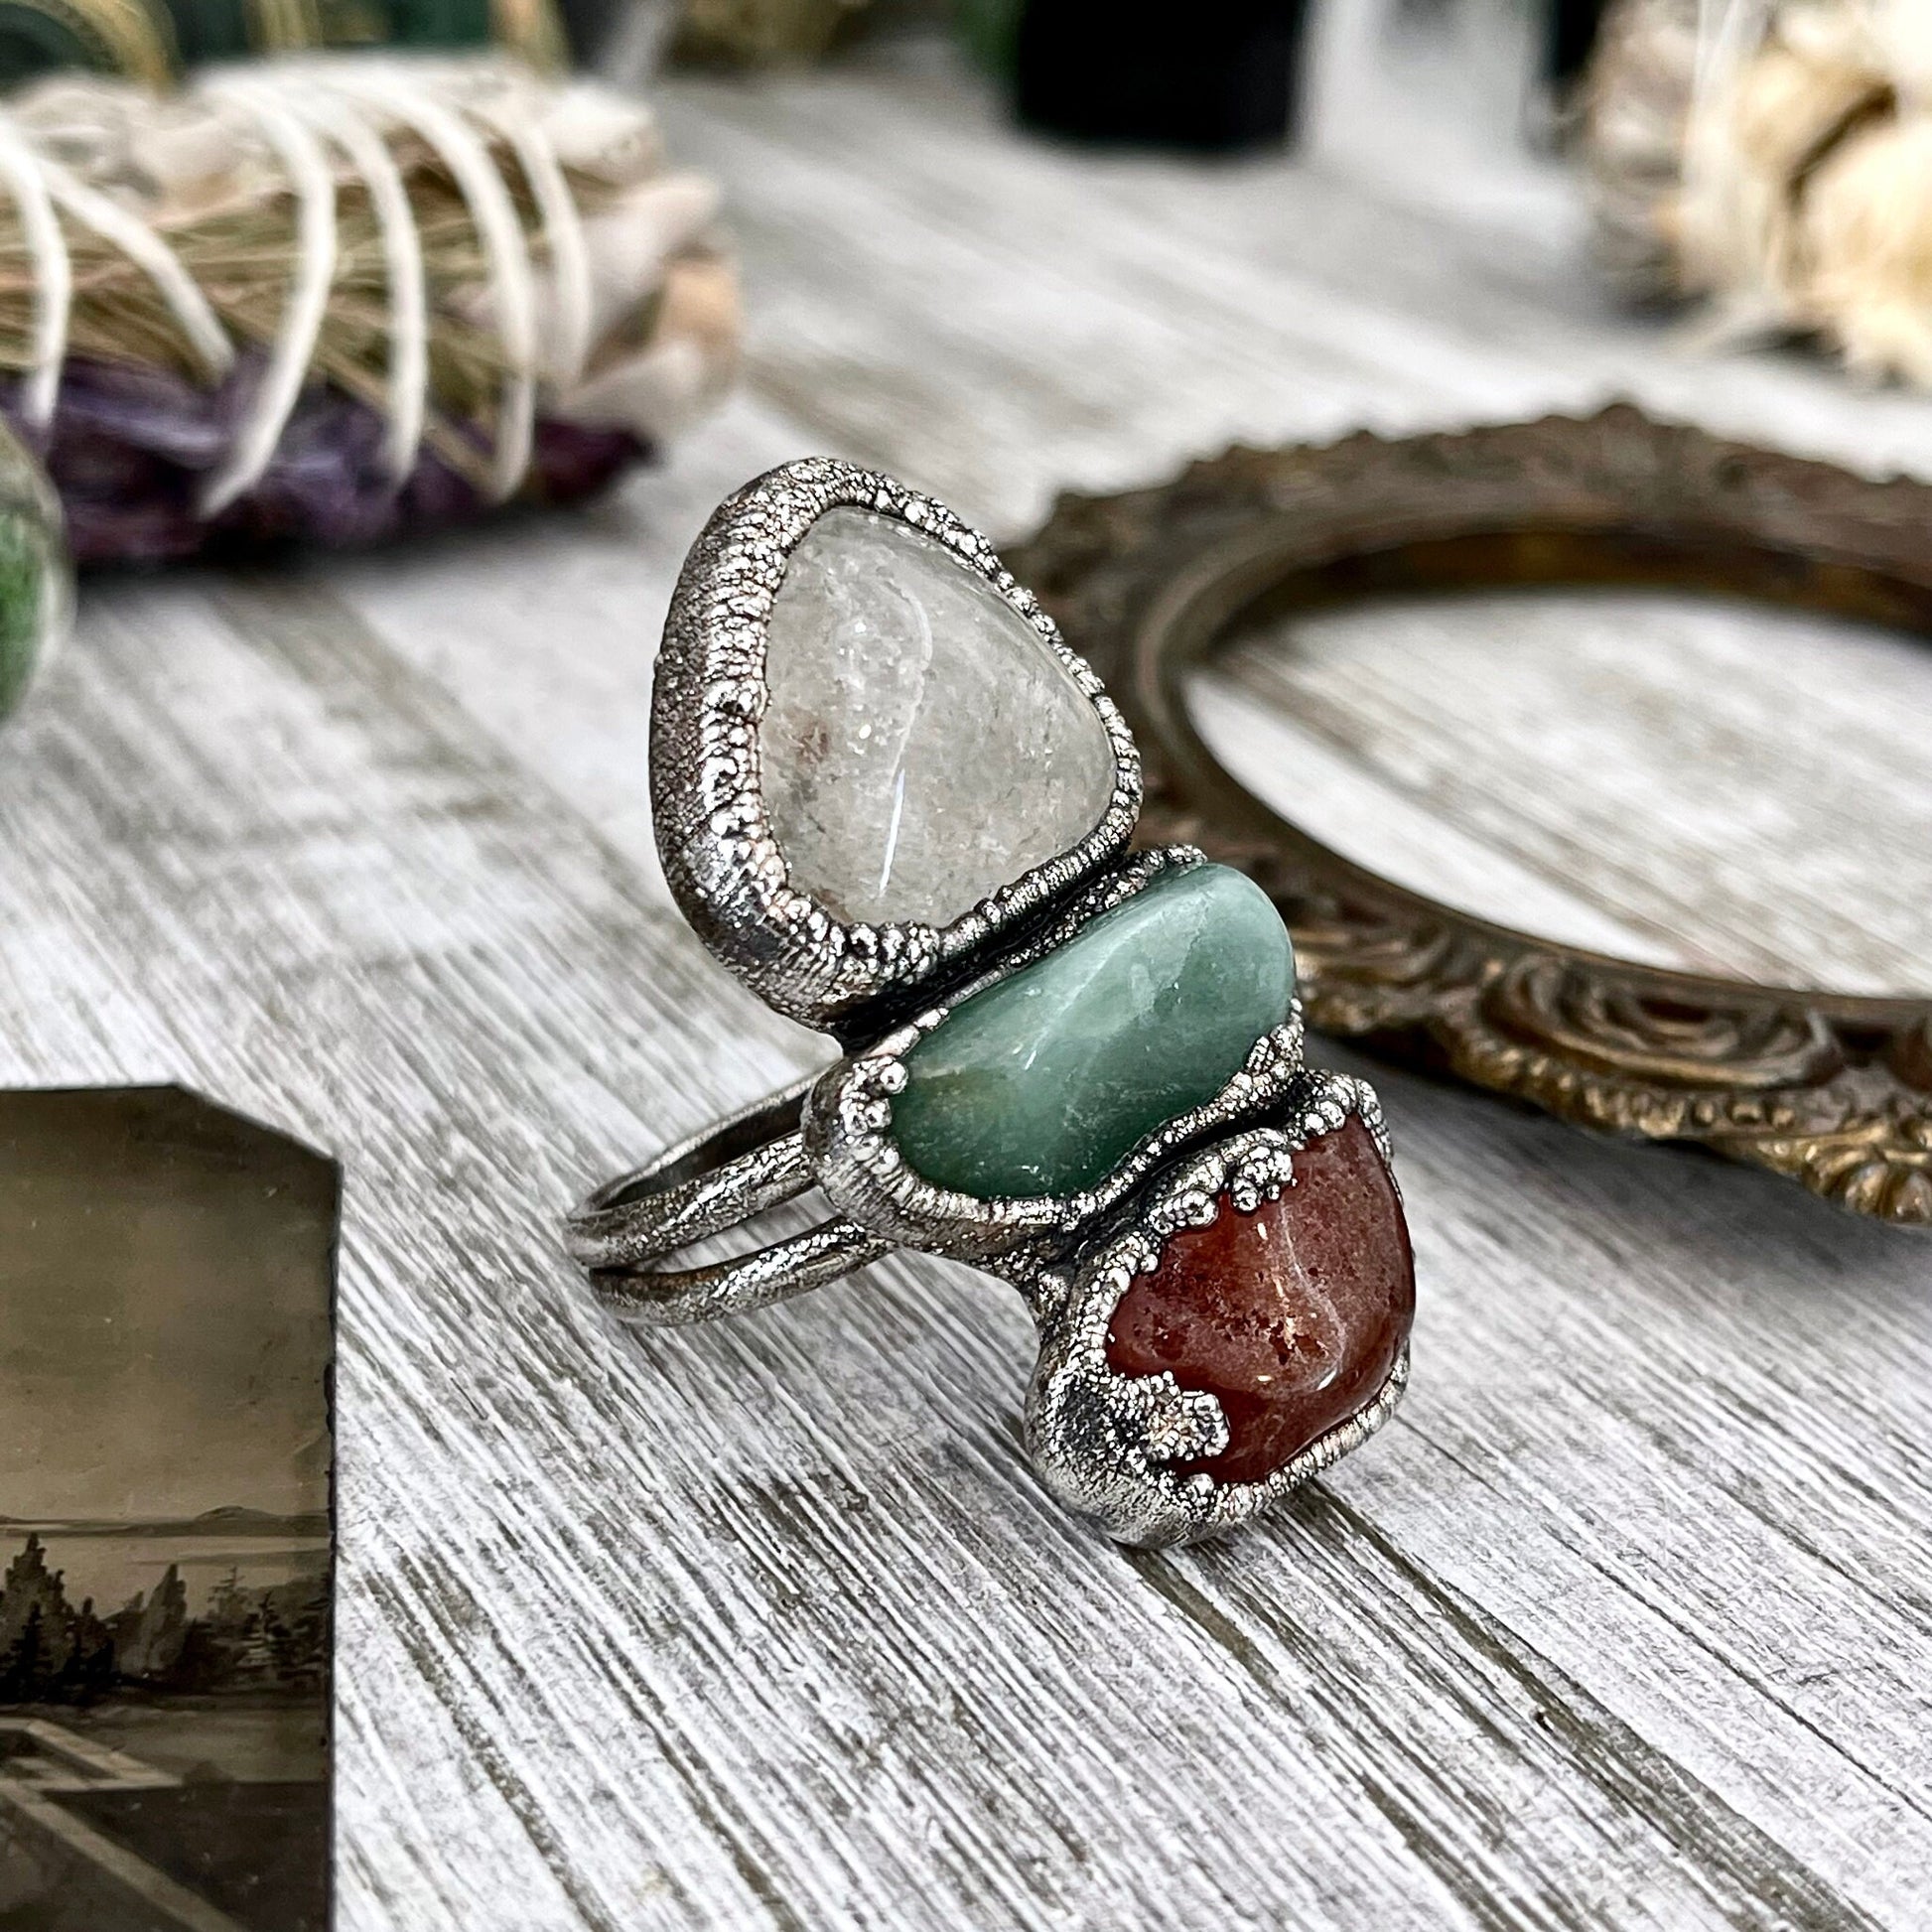 Size 9.5 Crystal Ring - Three Stone Red Carnelian Clear Quartz Aventurine Silver Ring / Foxlark Collection - One of a Kind / Crystal Jewelry